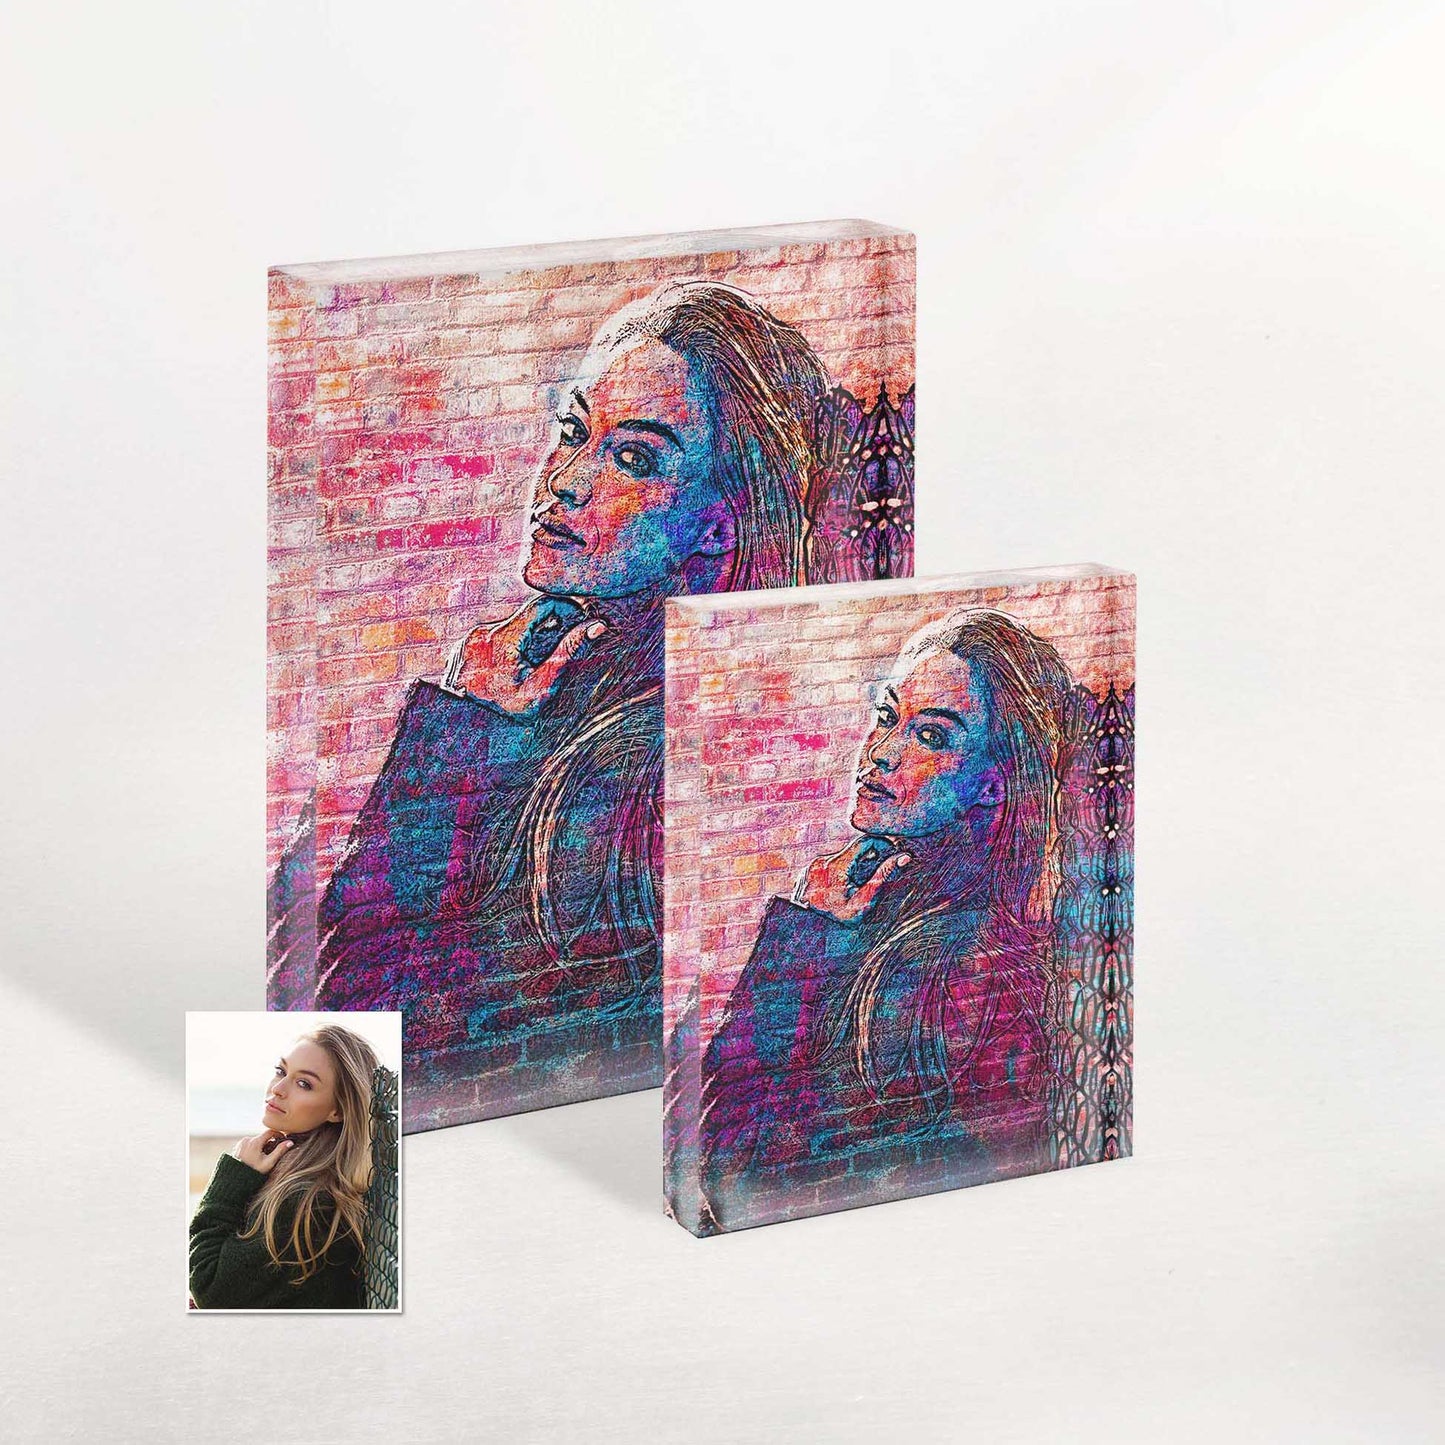 Capture the essence of street art with Personalised Brick Graffiti Art Acrylic Block Photo. Whether it's for an anniversary, birthday, or a gift for friends, this modern home decor piece transforms your photo into a graffiti-inspired masterpiece.